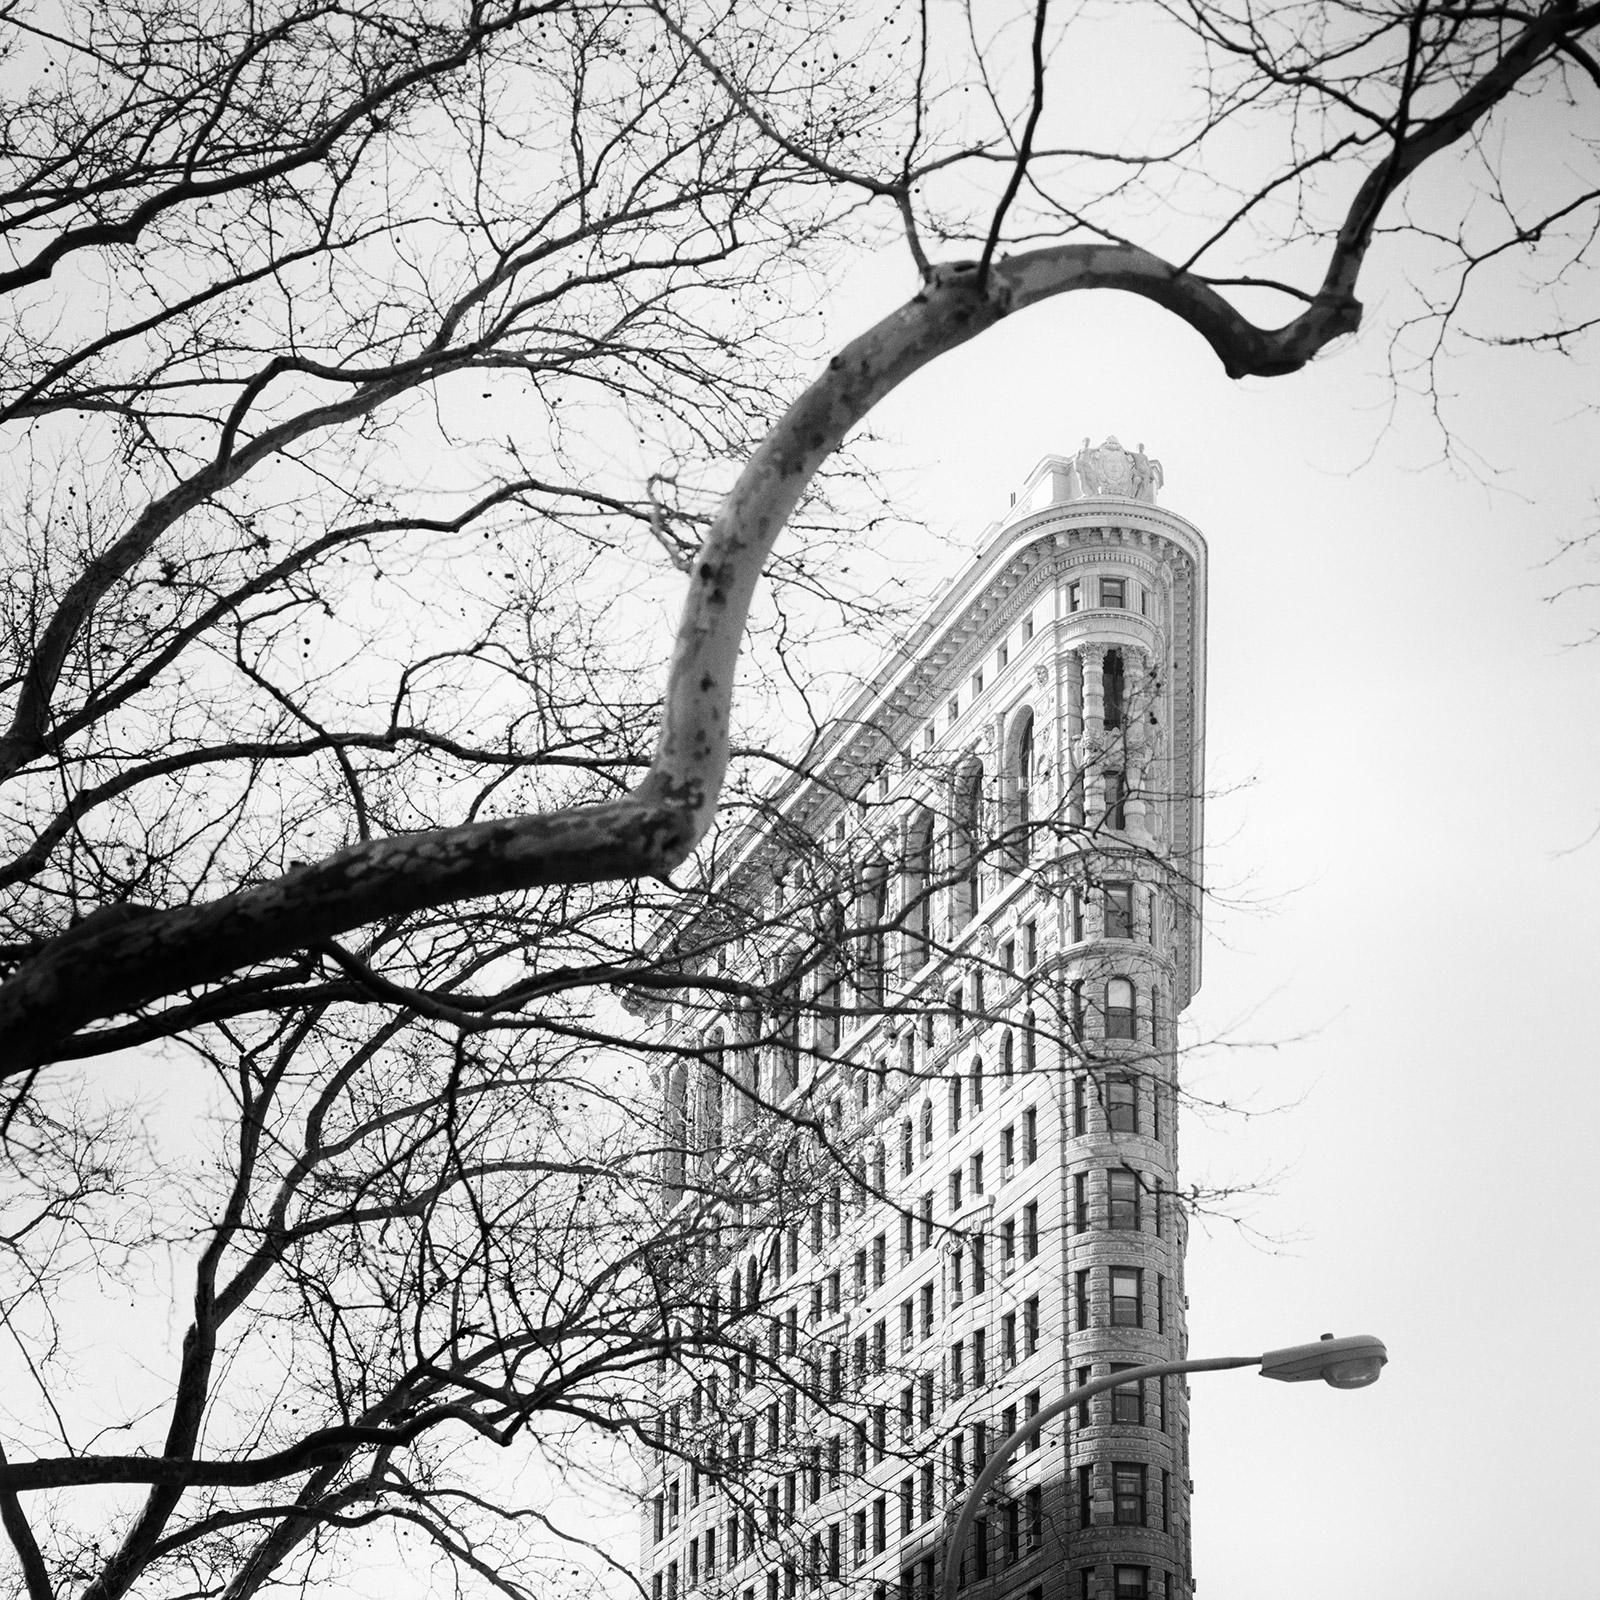 Gerald Berghammer, Ina Forstinger Landscape Photograph - Flatiron Building, New York City, art black and white photography, architecture